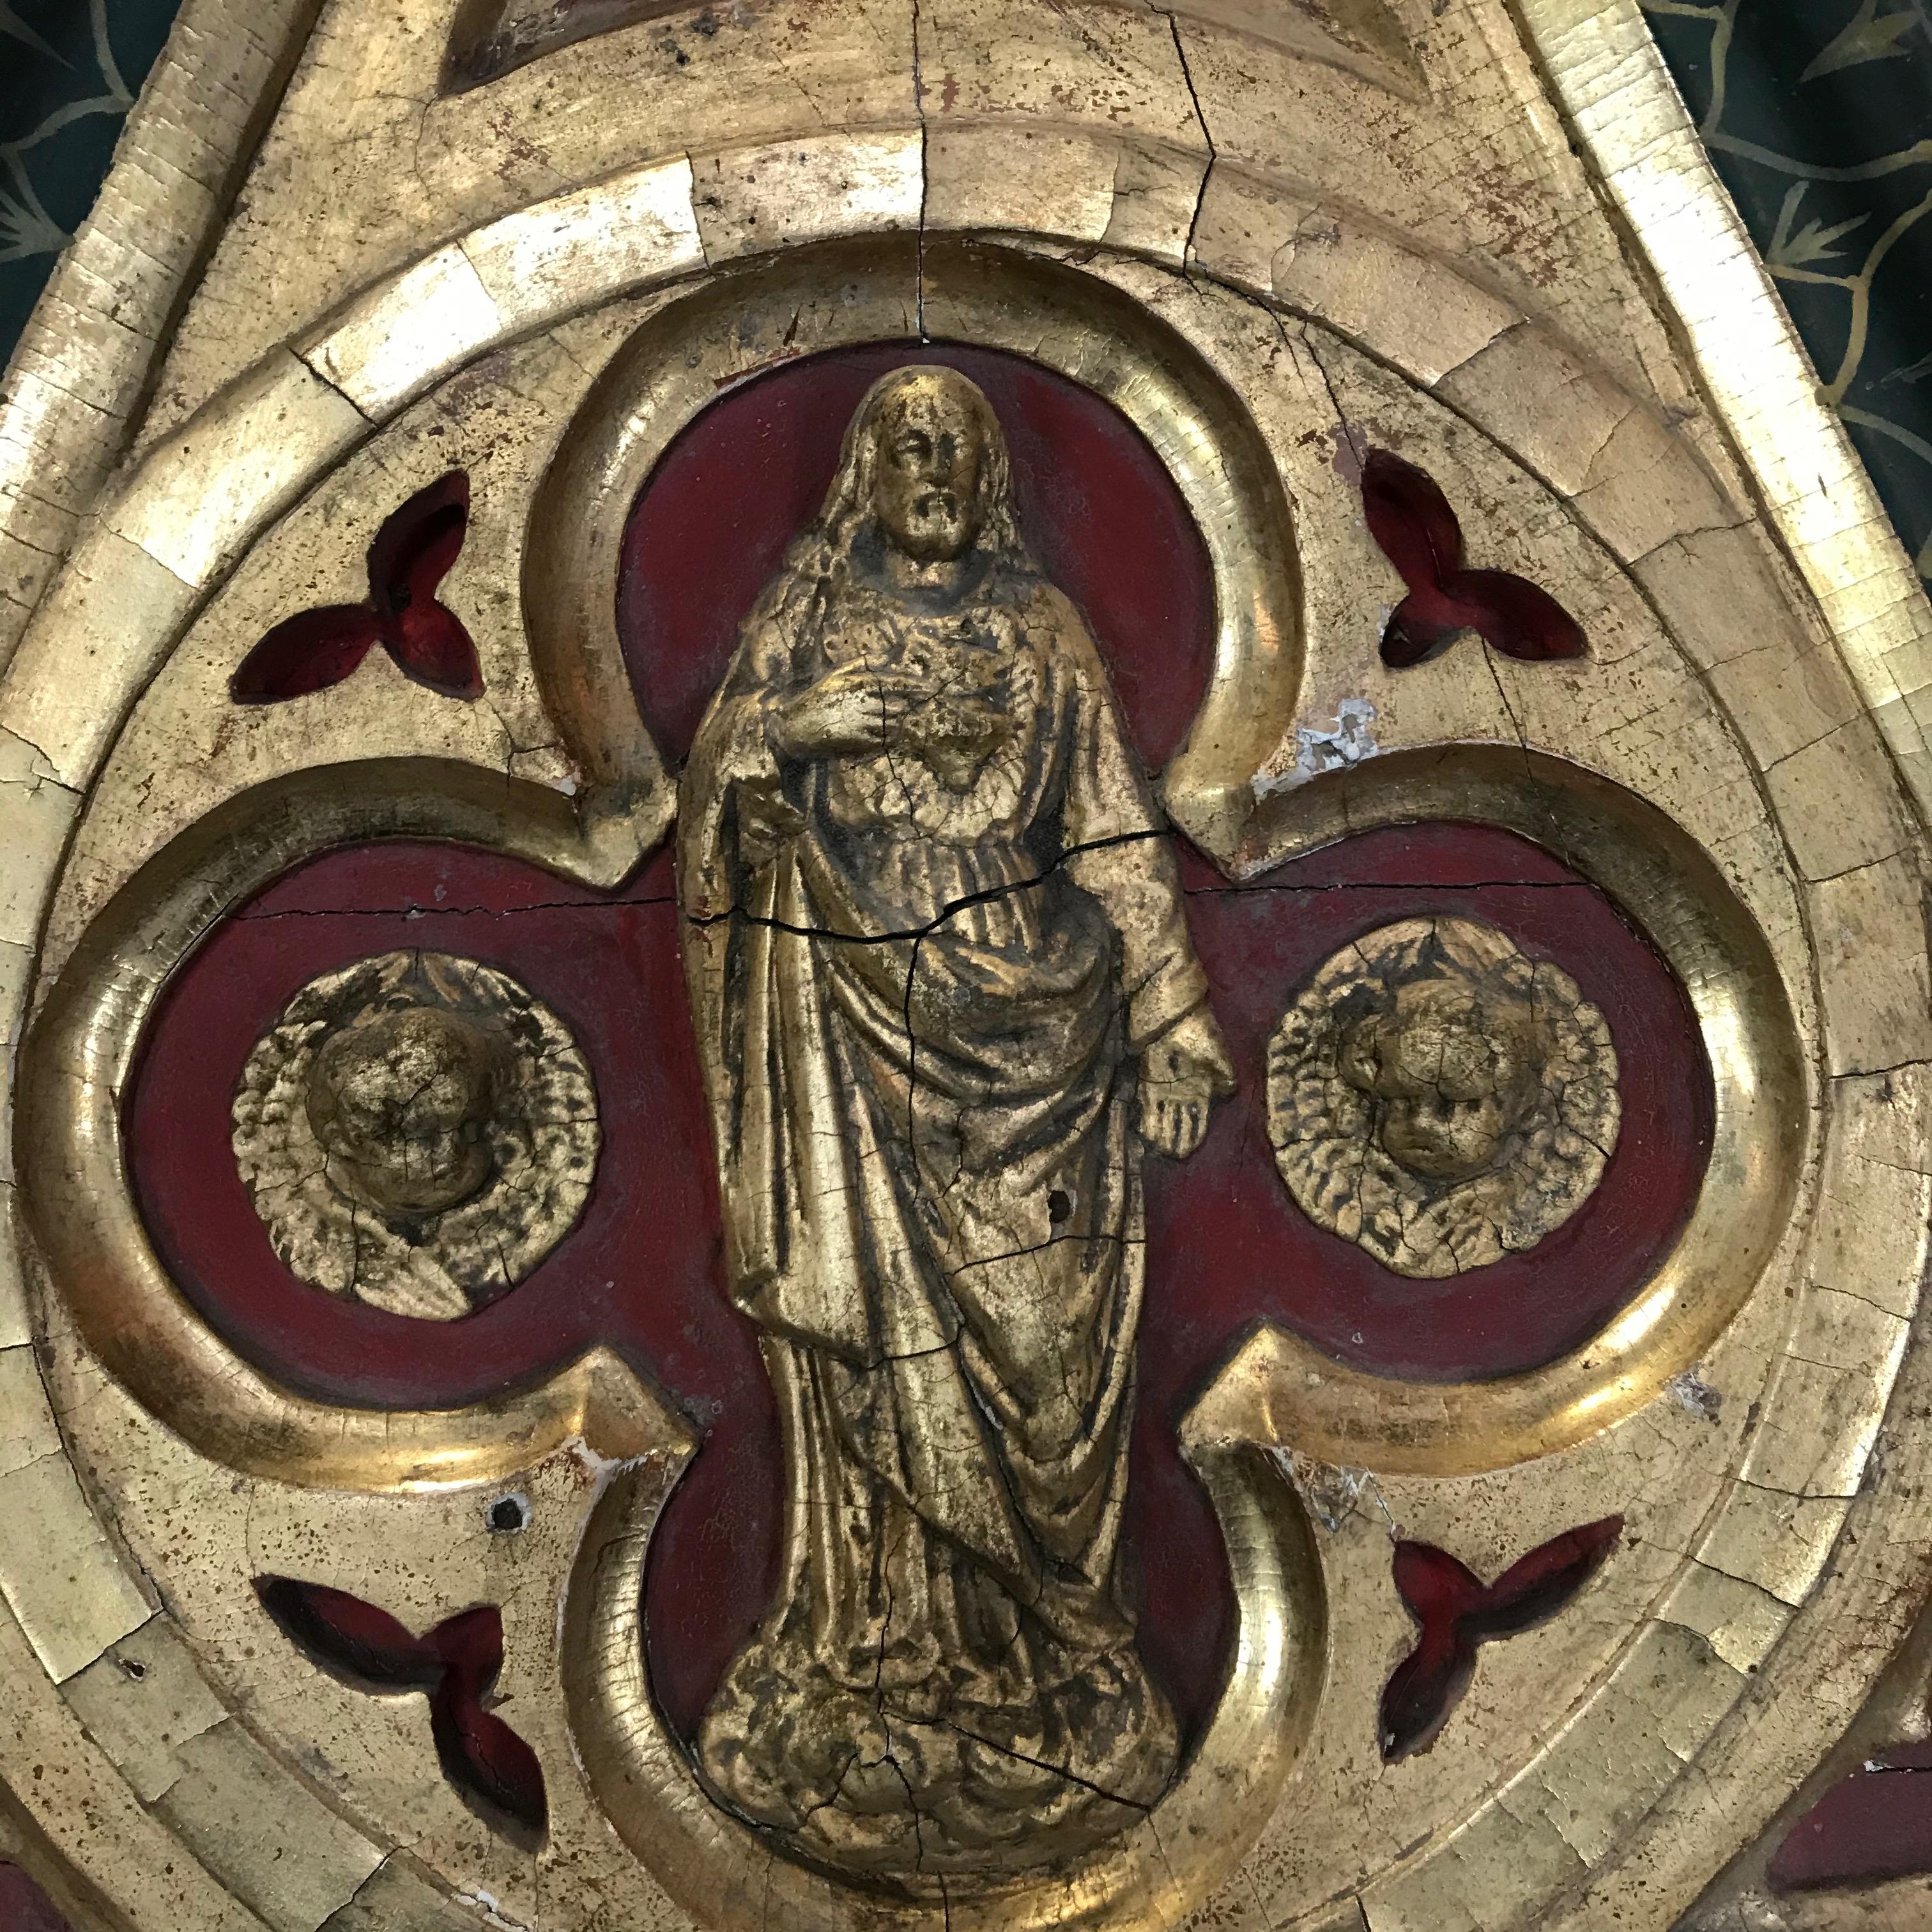 An incredible eye catching piece of wall art mined from a 19th century French church. The wall sculpture is a Gothic shape having carved giltwood and beautifully painted bas relief art at the top of a saint with cherubs. “Confrerie des Dames de